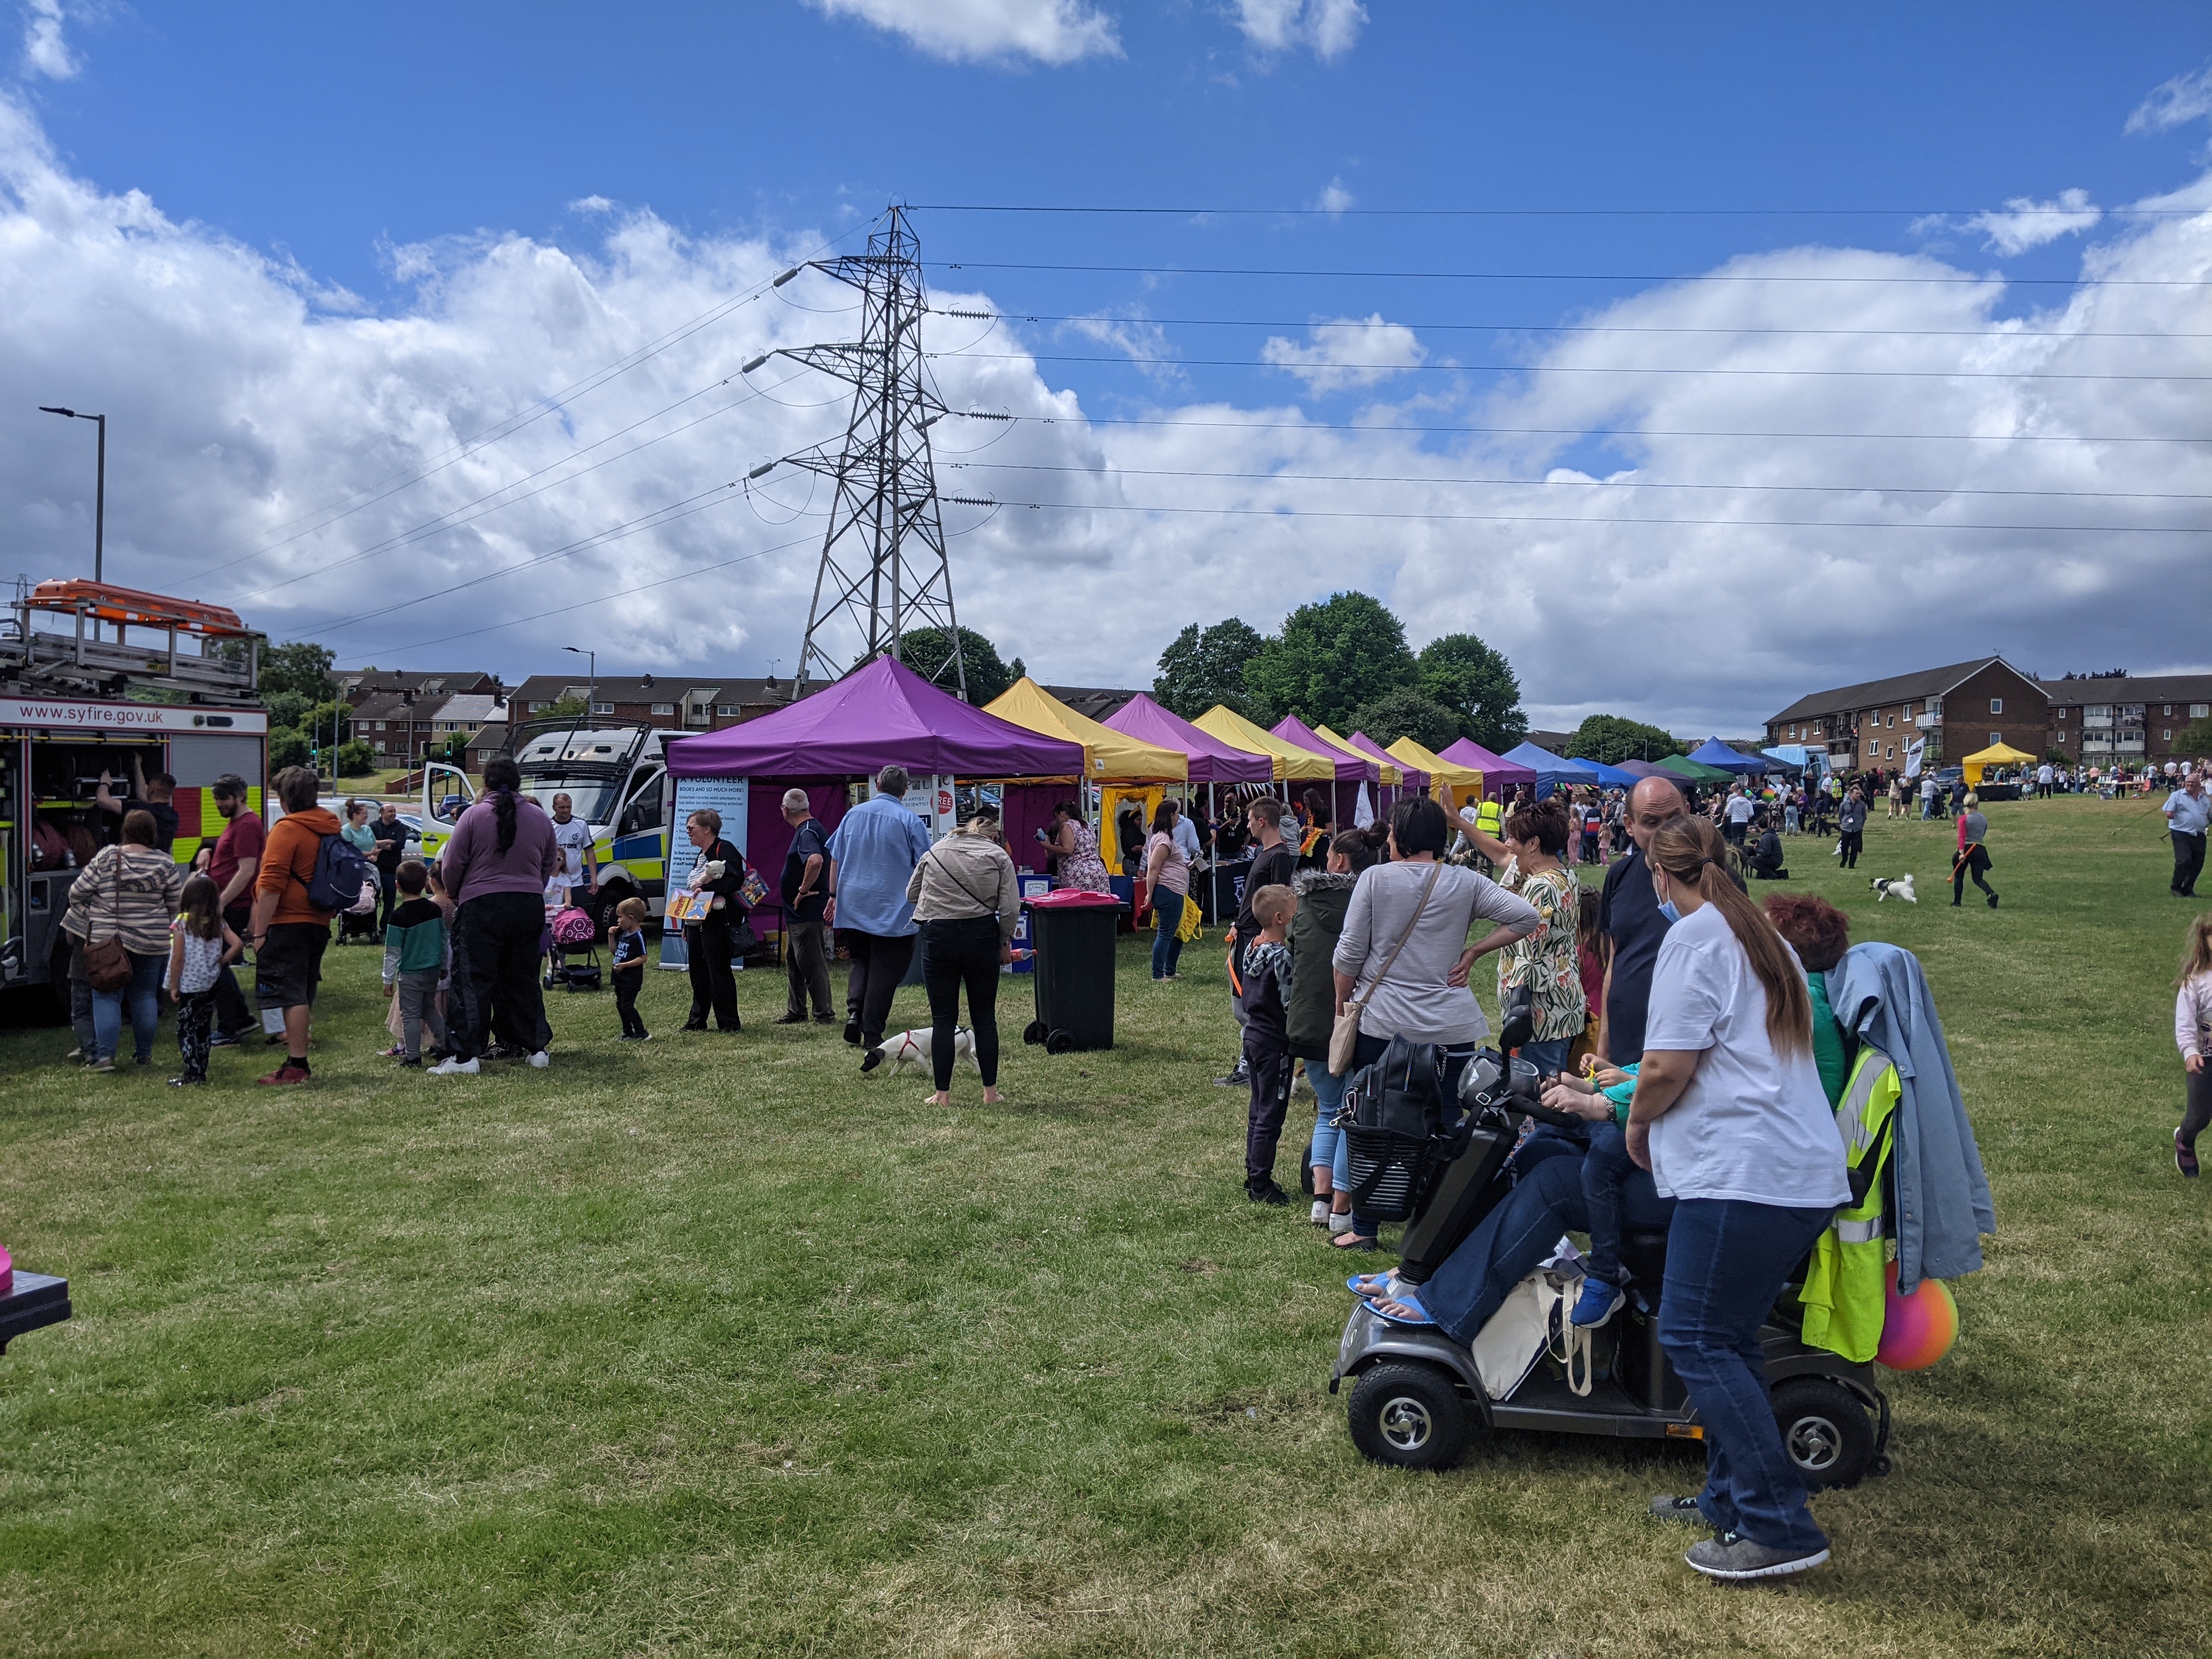 The image shows attendees and stalls at the Greasbrough fete